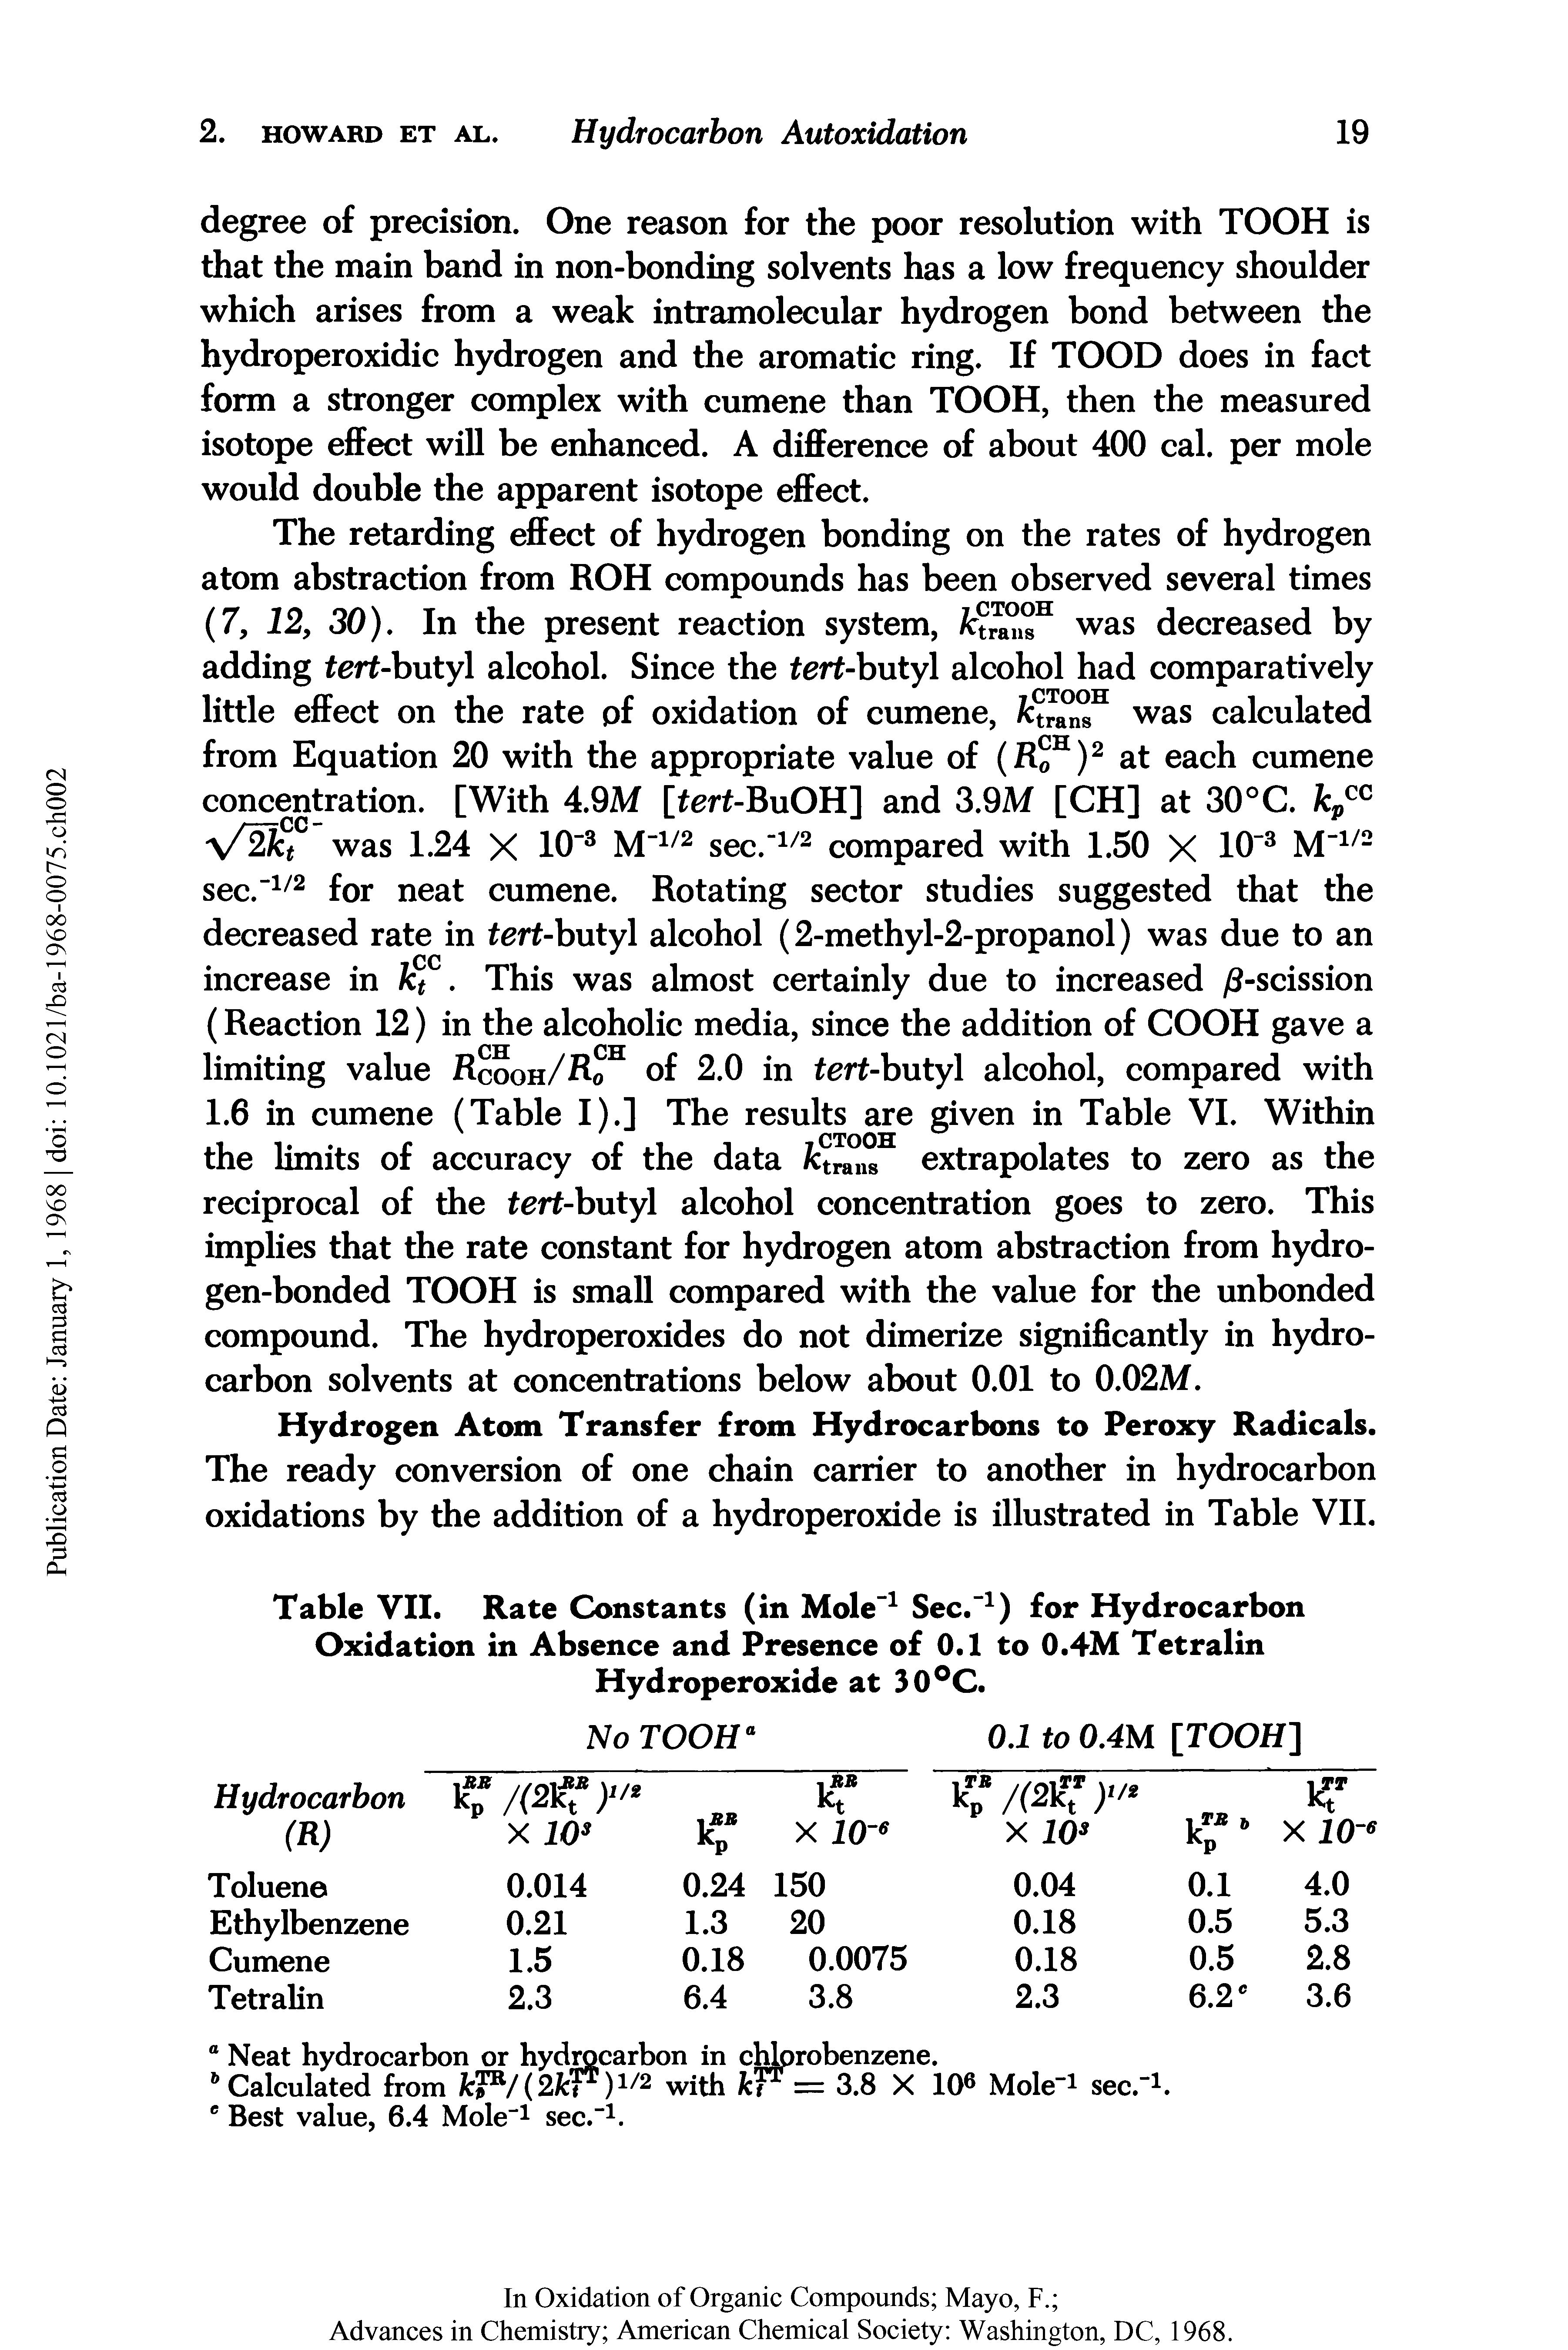 Table VII. Rate Constants (in Mole"1 Sec."1) for Hydrocarbon Oxidation in Absence and Presence of 0.1 to 0.4M Tetralin Hydroperoxide at 30°C.